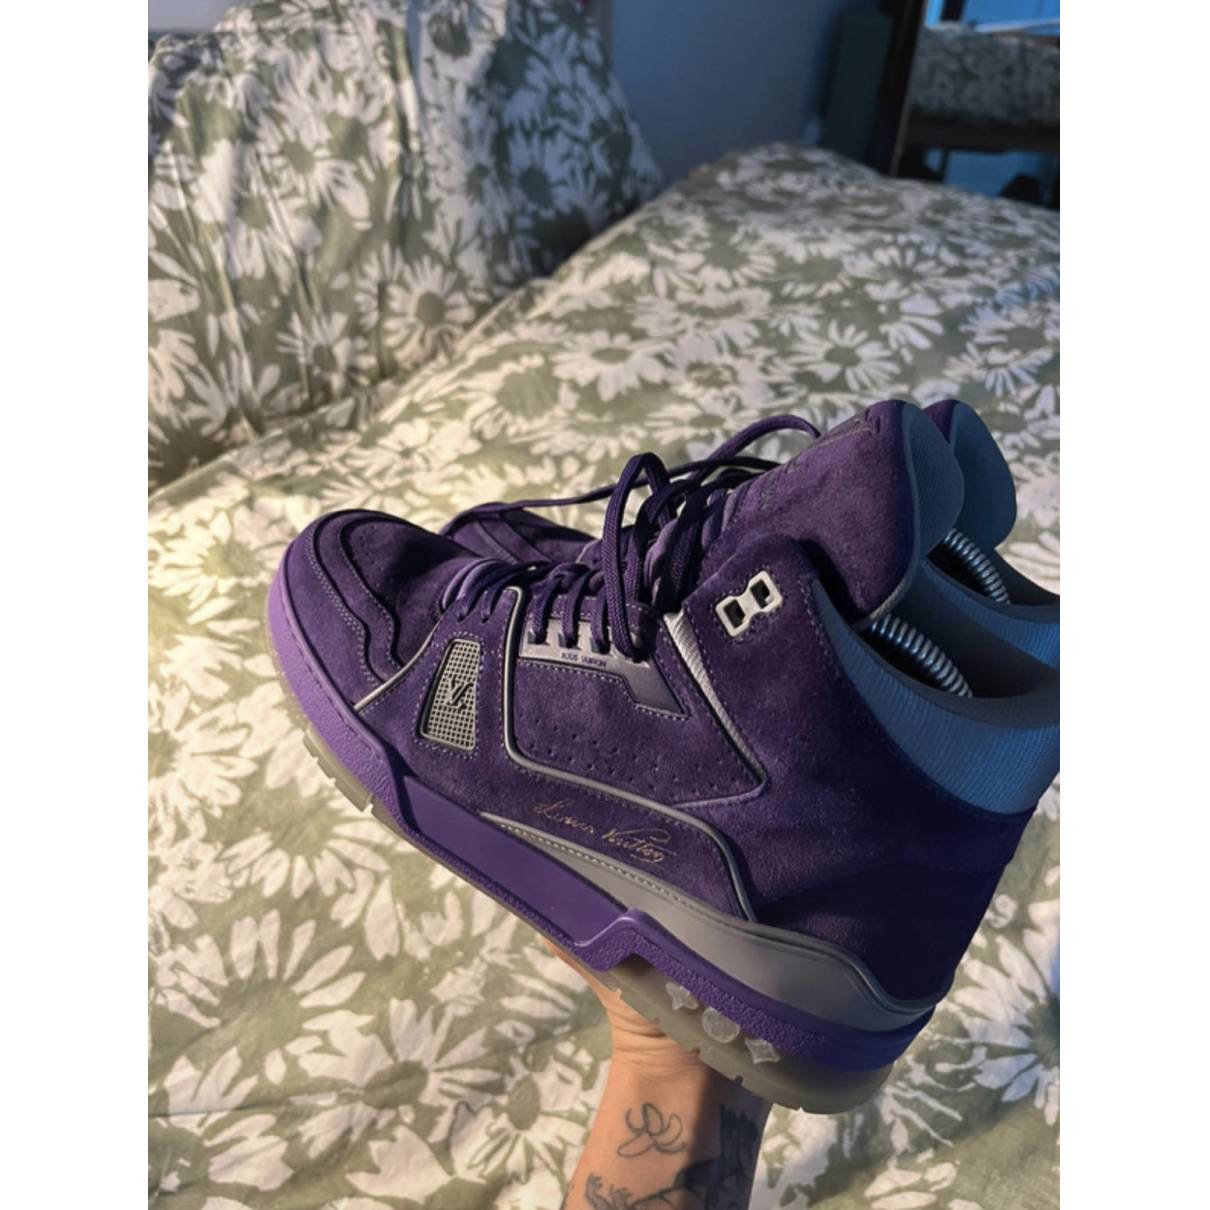 Lv trainer high trainers Louis Vuitton Purple size 6.5 US in Suede